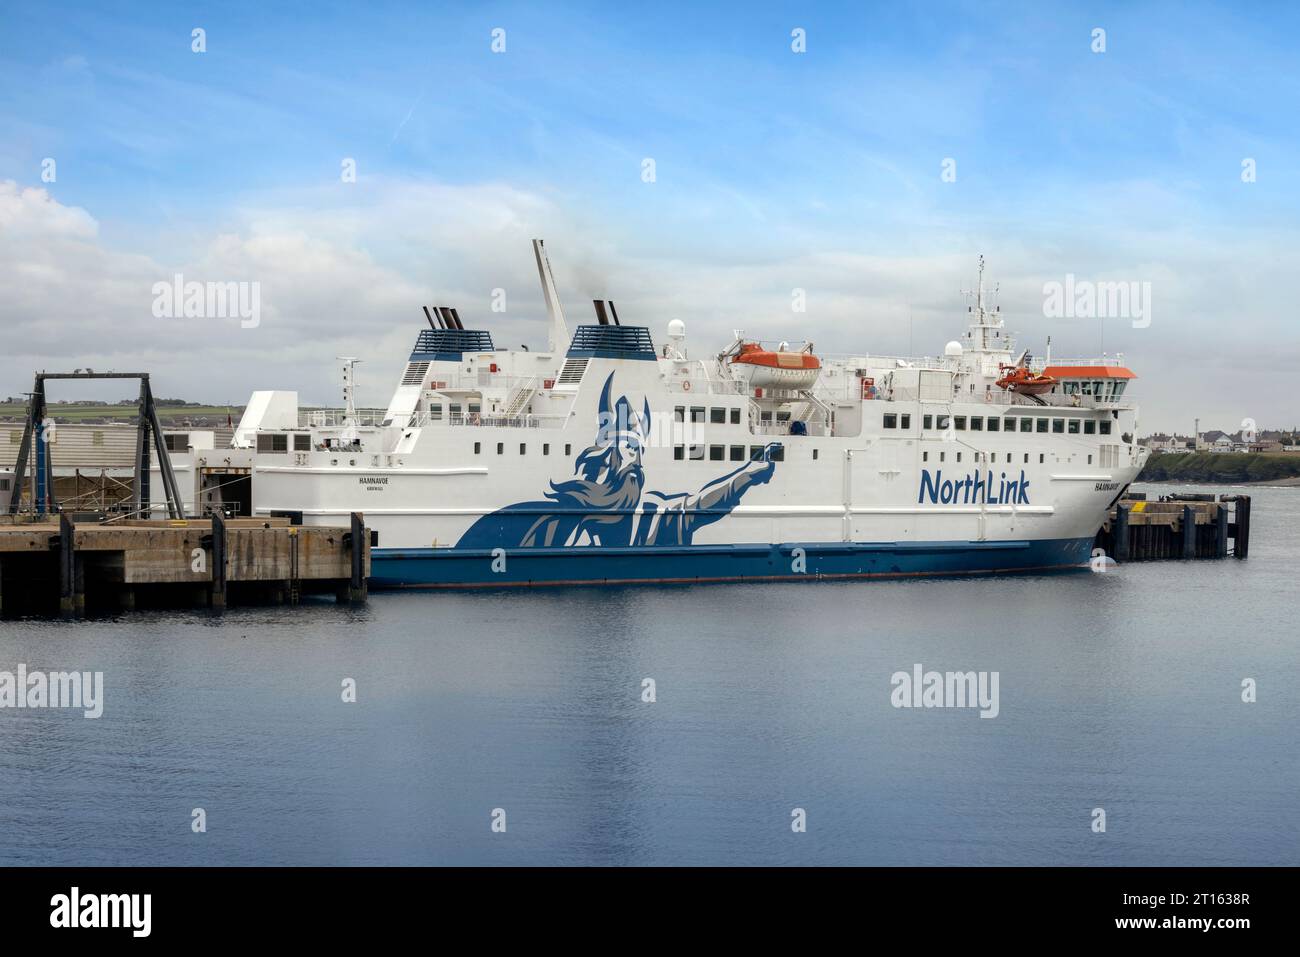 Northlink Ferry to the Orkney Islands from Scrabster, Caithness, Scotland. Stock Photo